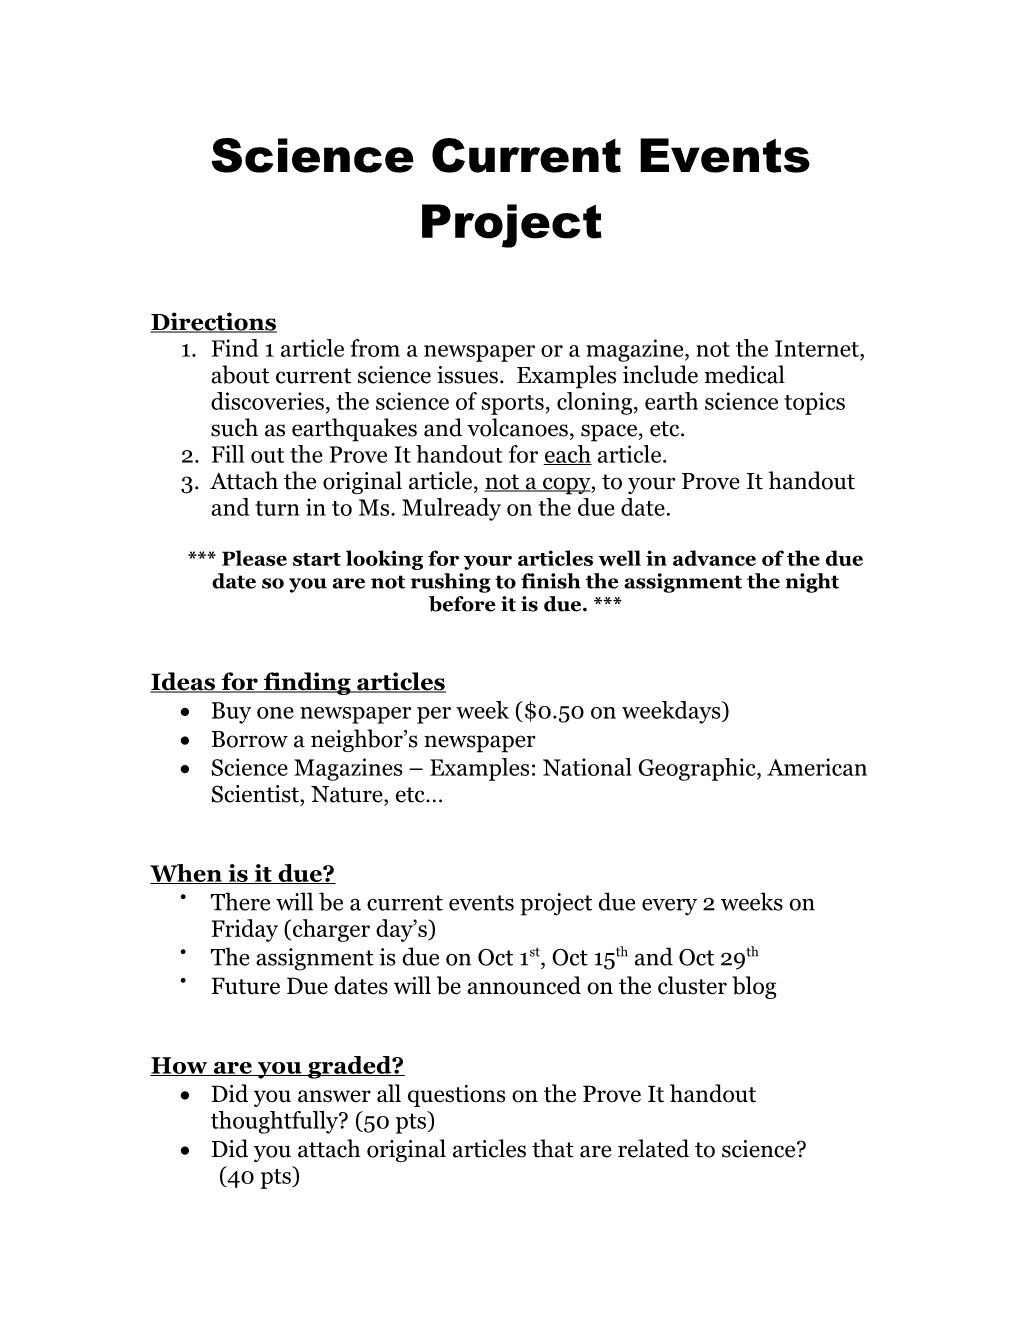 Science Current Events Project